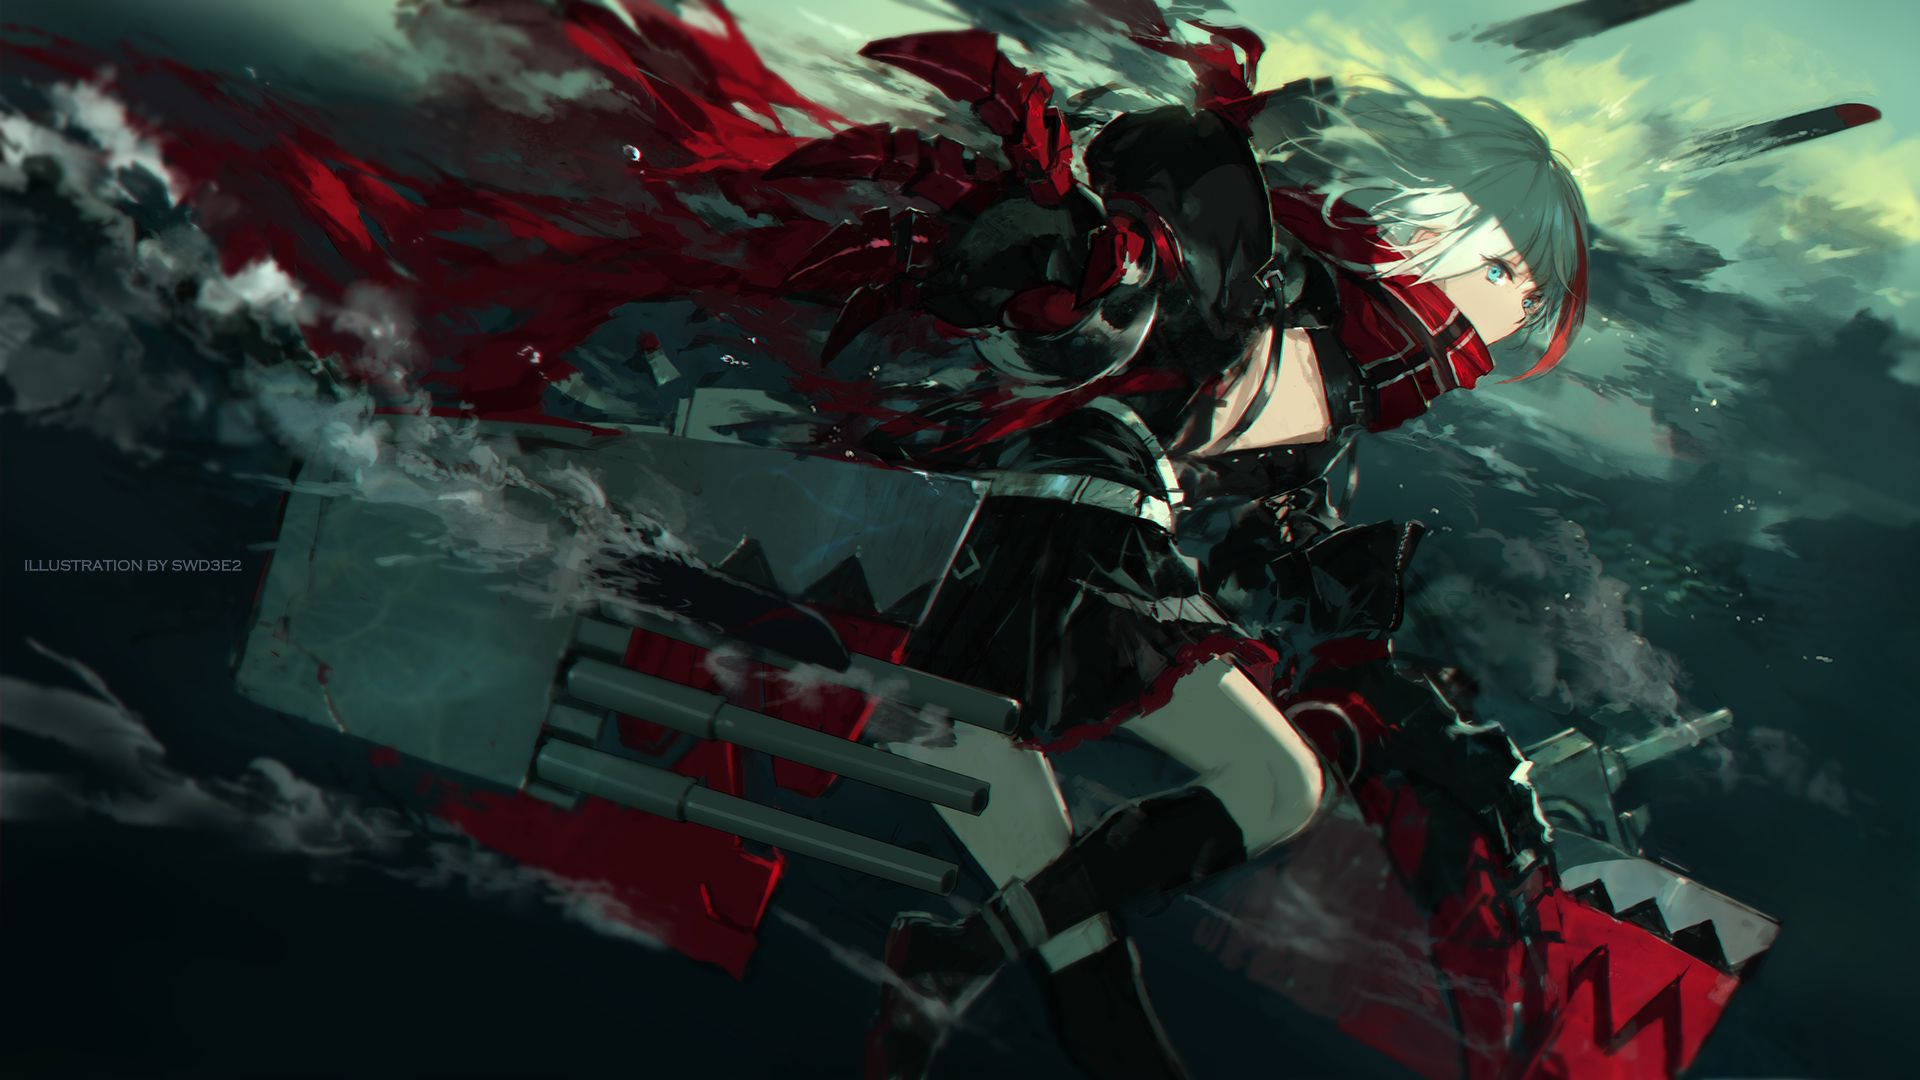 Explore the depths of the ocean with Admiral Graf Spee! Wallpaper